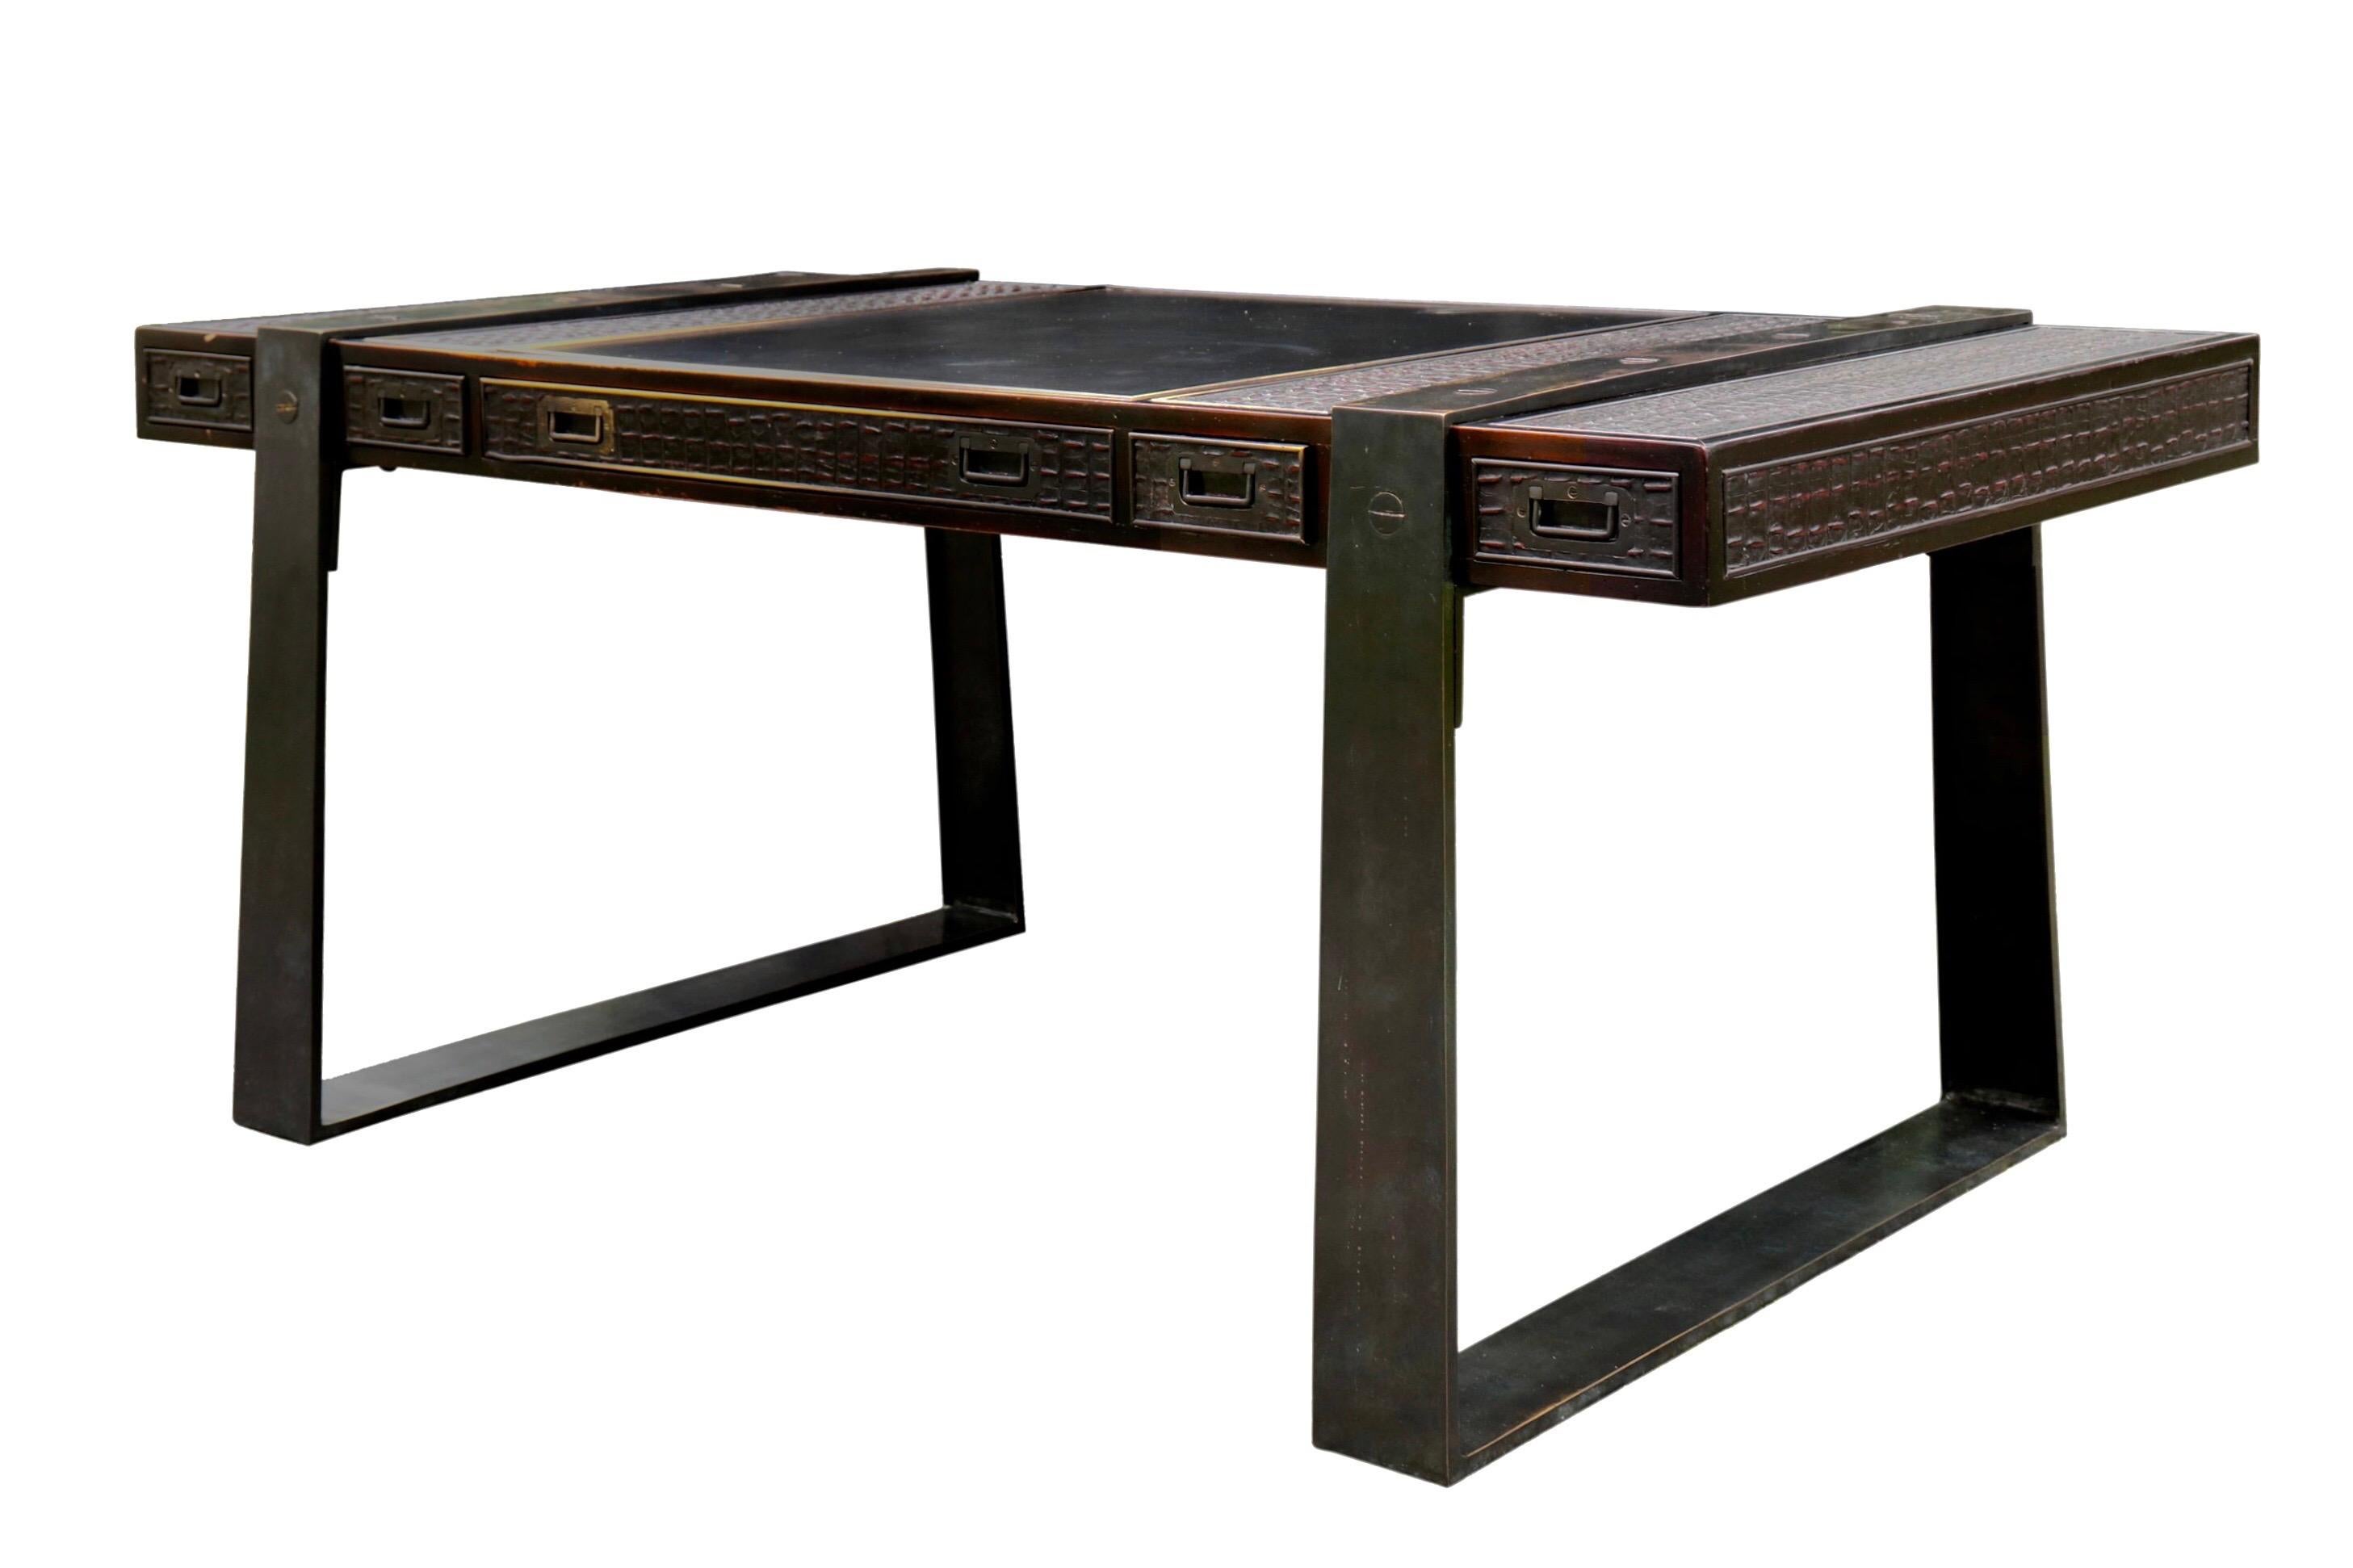 A campaign style partners desk made by Theodore Alexander. The table top has a large central black leather writing area and is supported with two trapezoid shaped brass legs in a black finish. Five drawers on each side open with recessed campaign